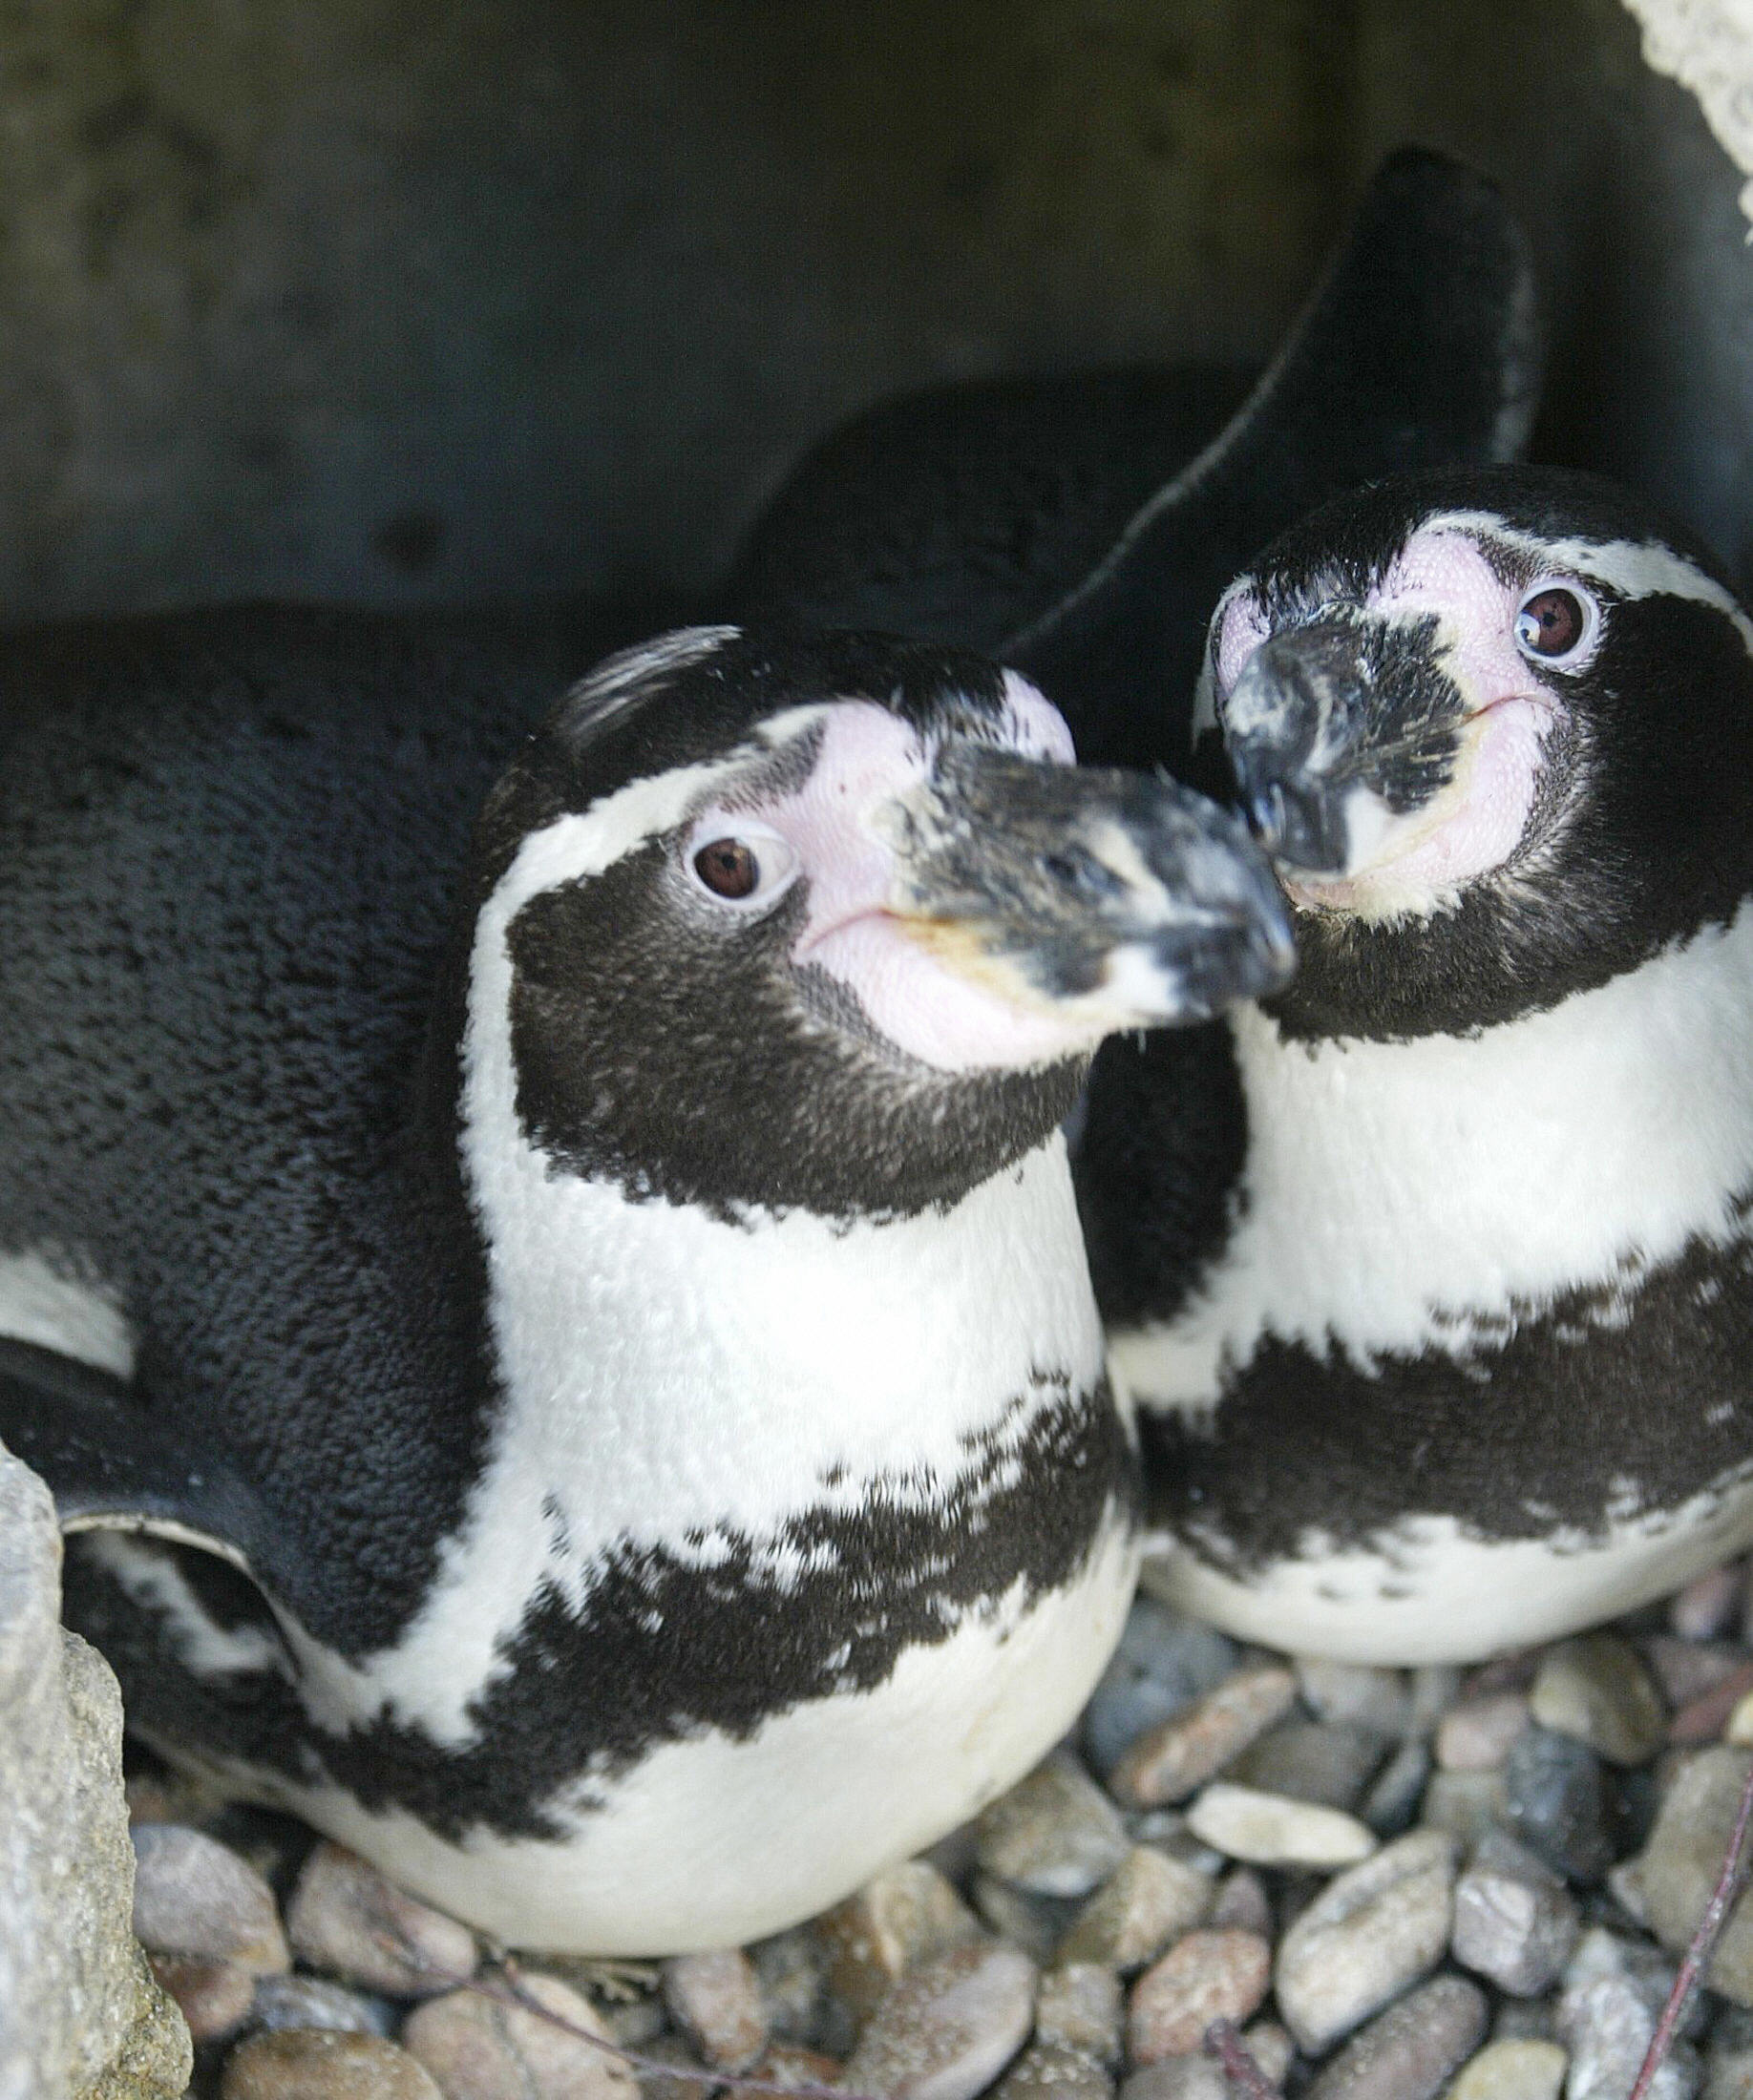 Two male penguins “Sechs Punkt” (Six Point) and “Schraegstrich” (Slash) cuddle at the Bremerhaven zoo in Germany. (Photo: Getty)